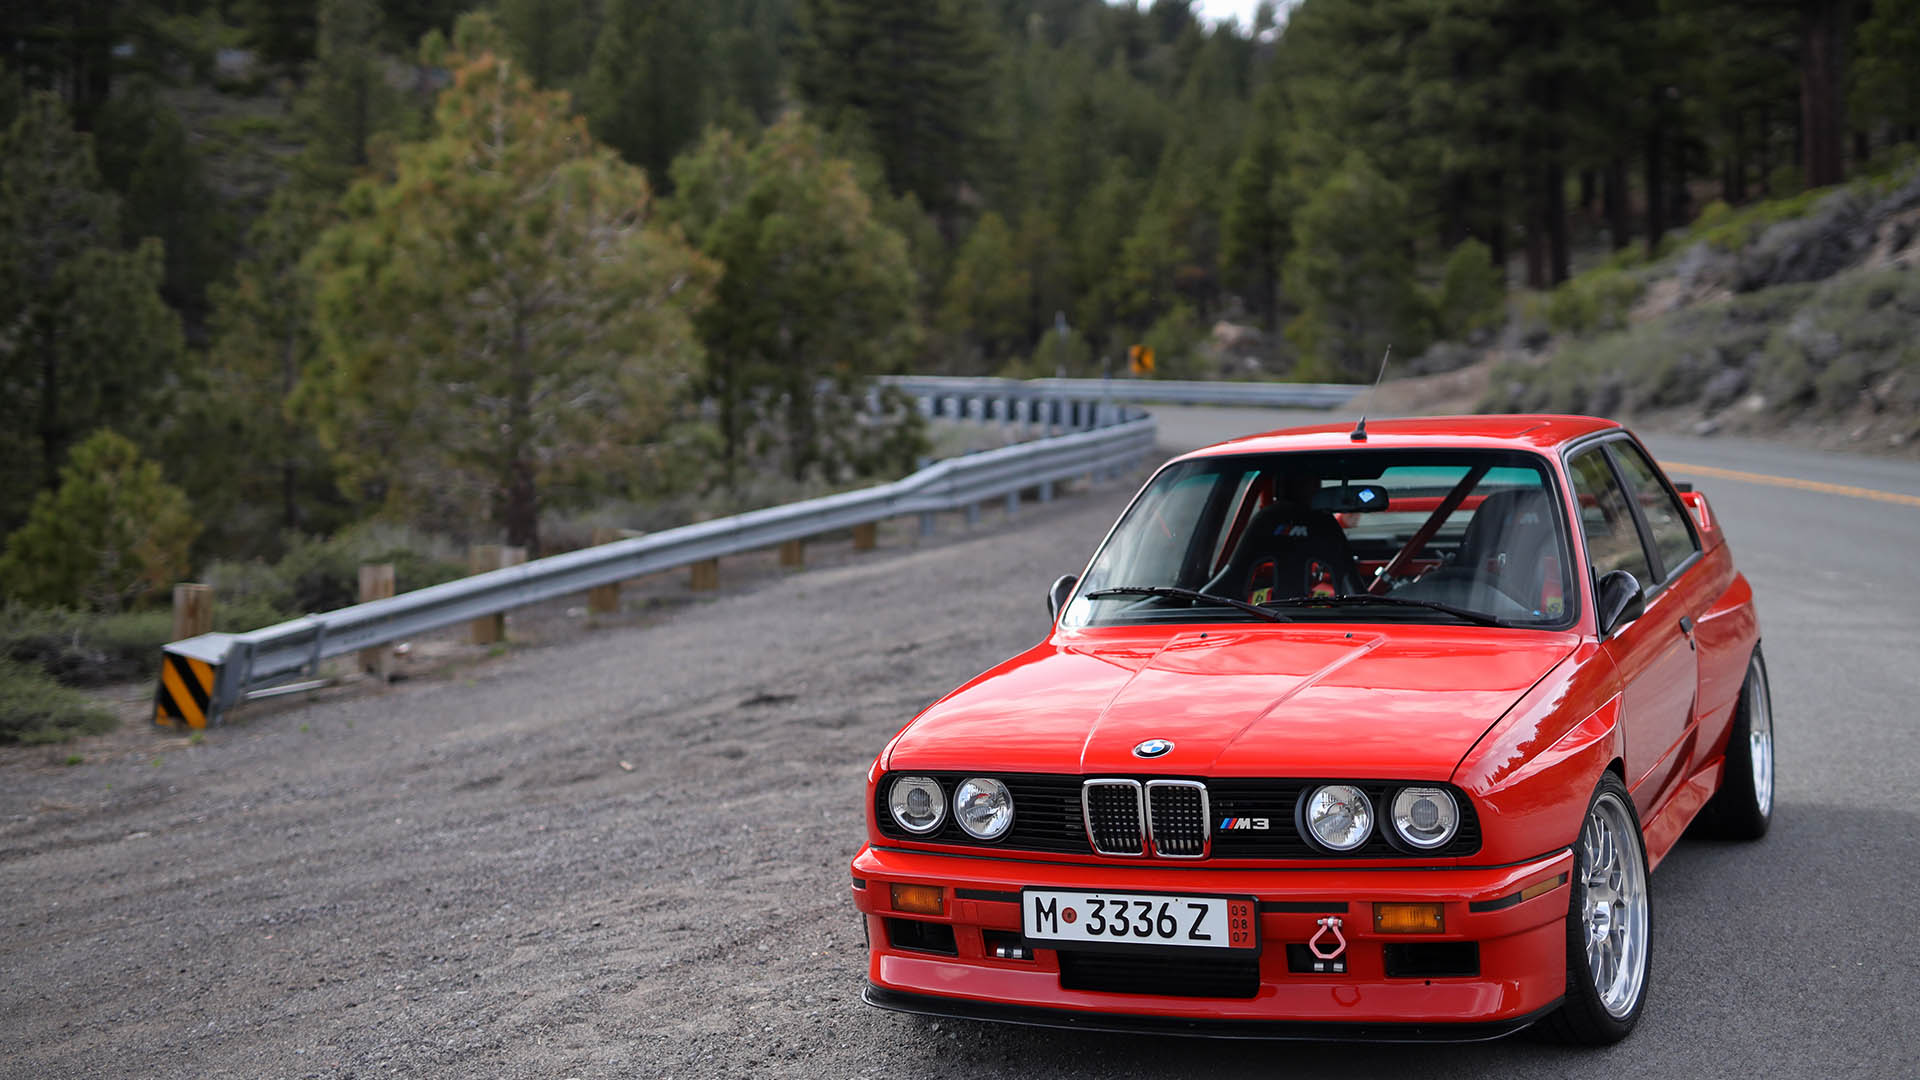 Supercharged In The Sierra Mountains: Widebody E30 M3